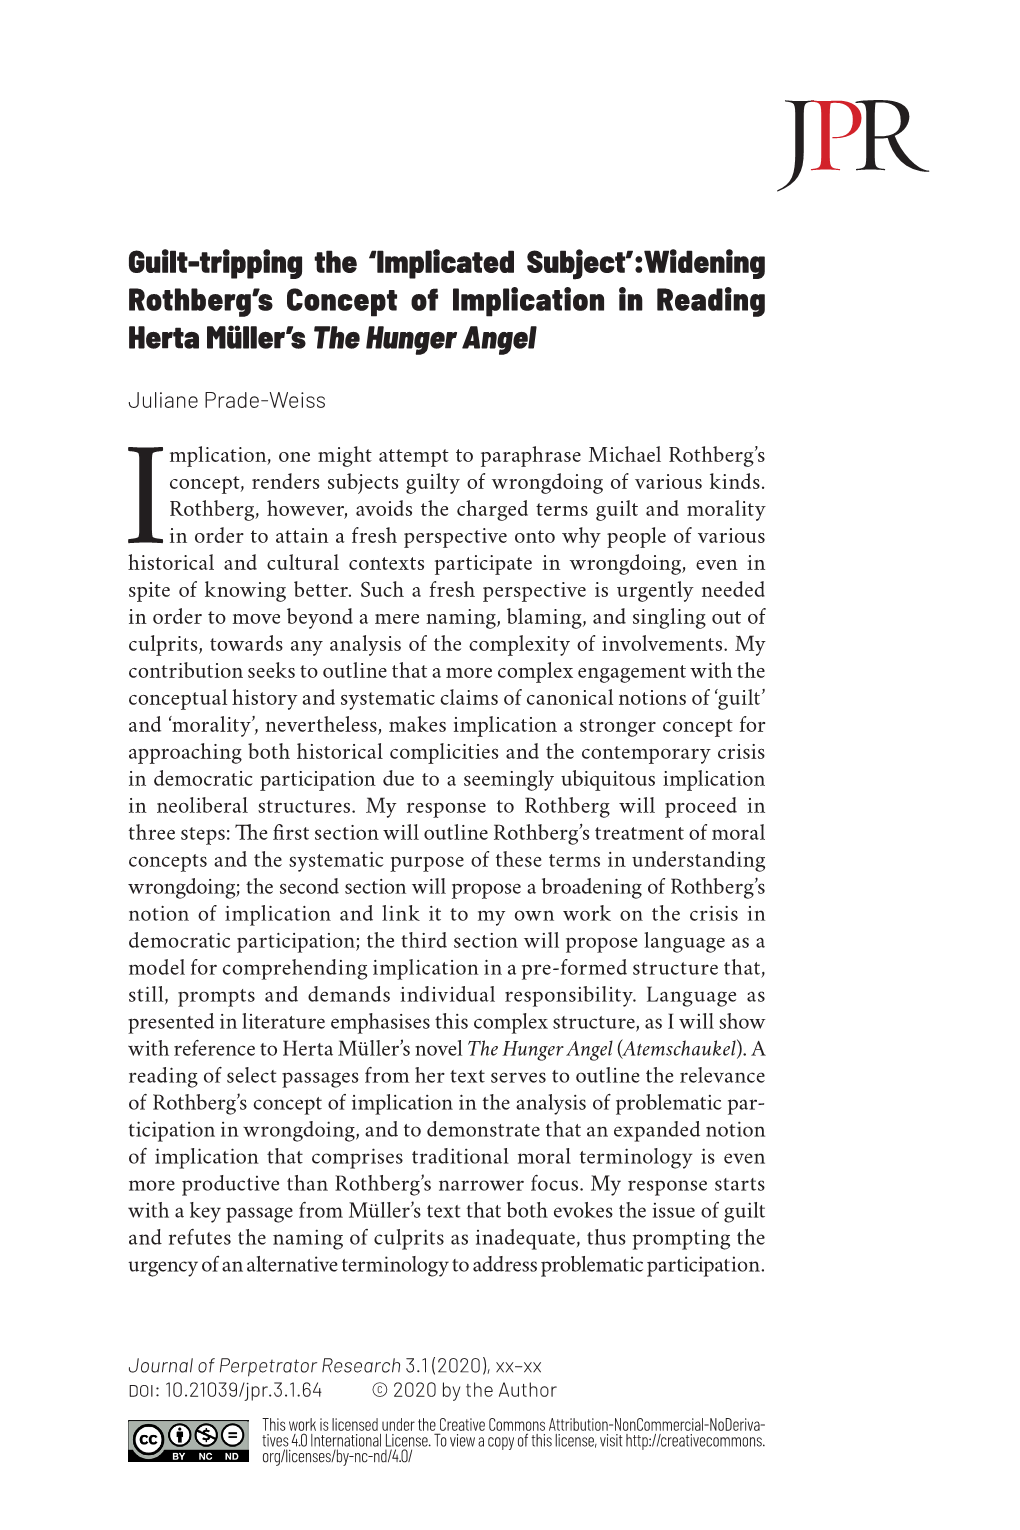 Widening Rothberg's Concept of Implication in Reading Herta Müller's the Hunger